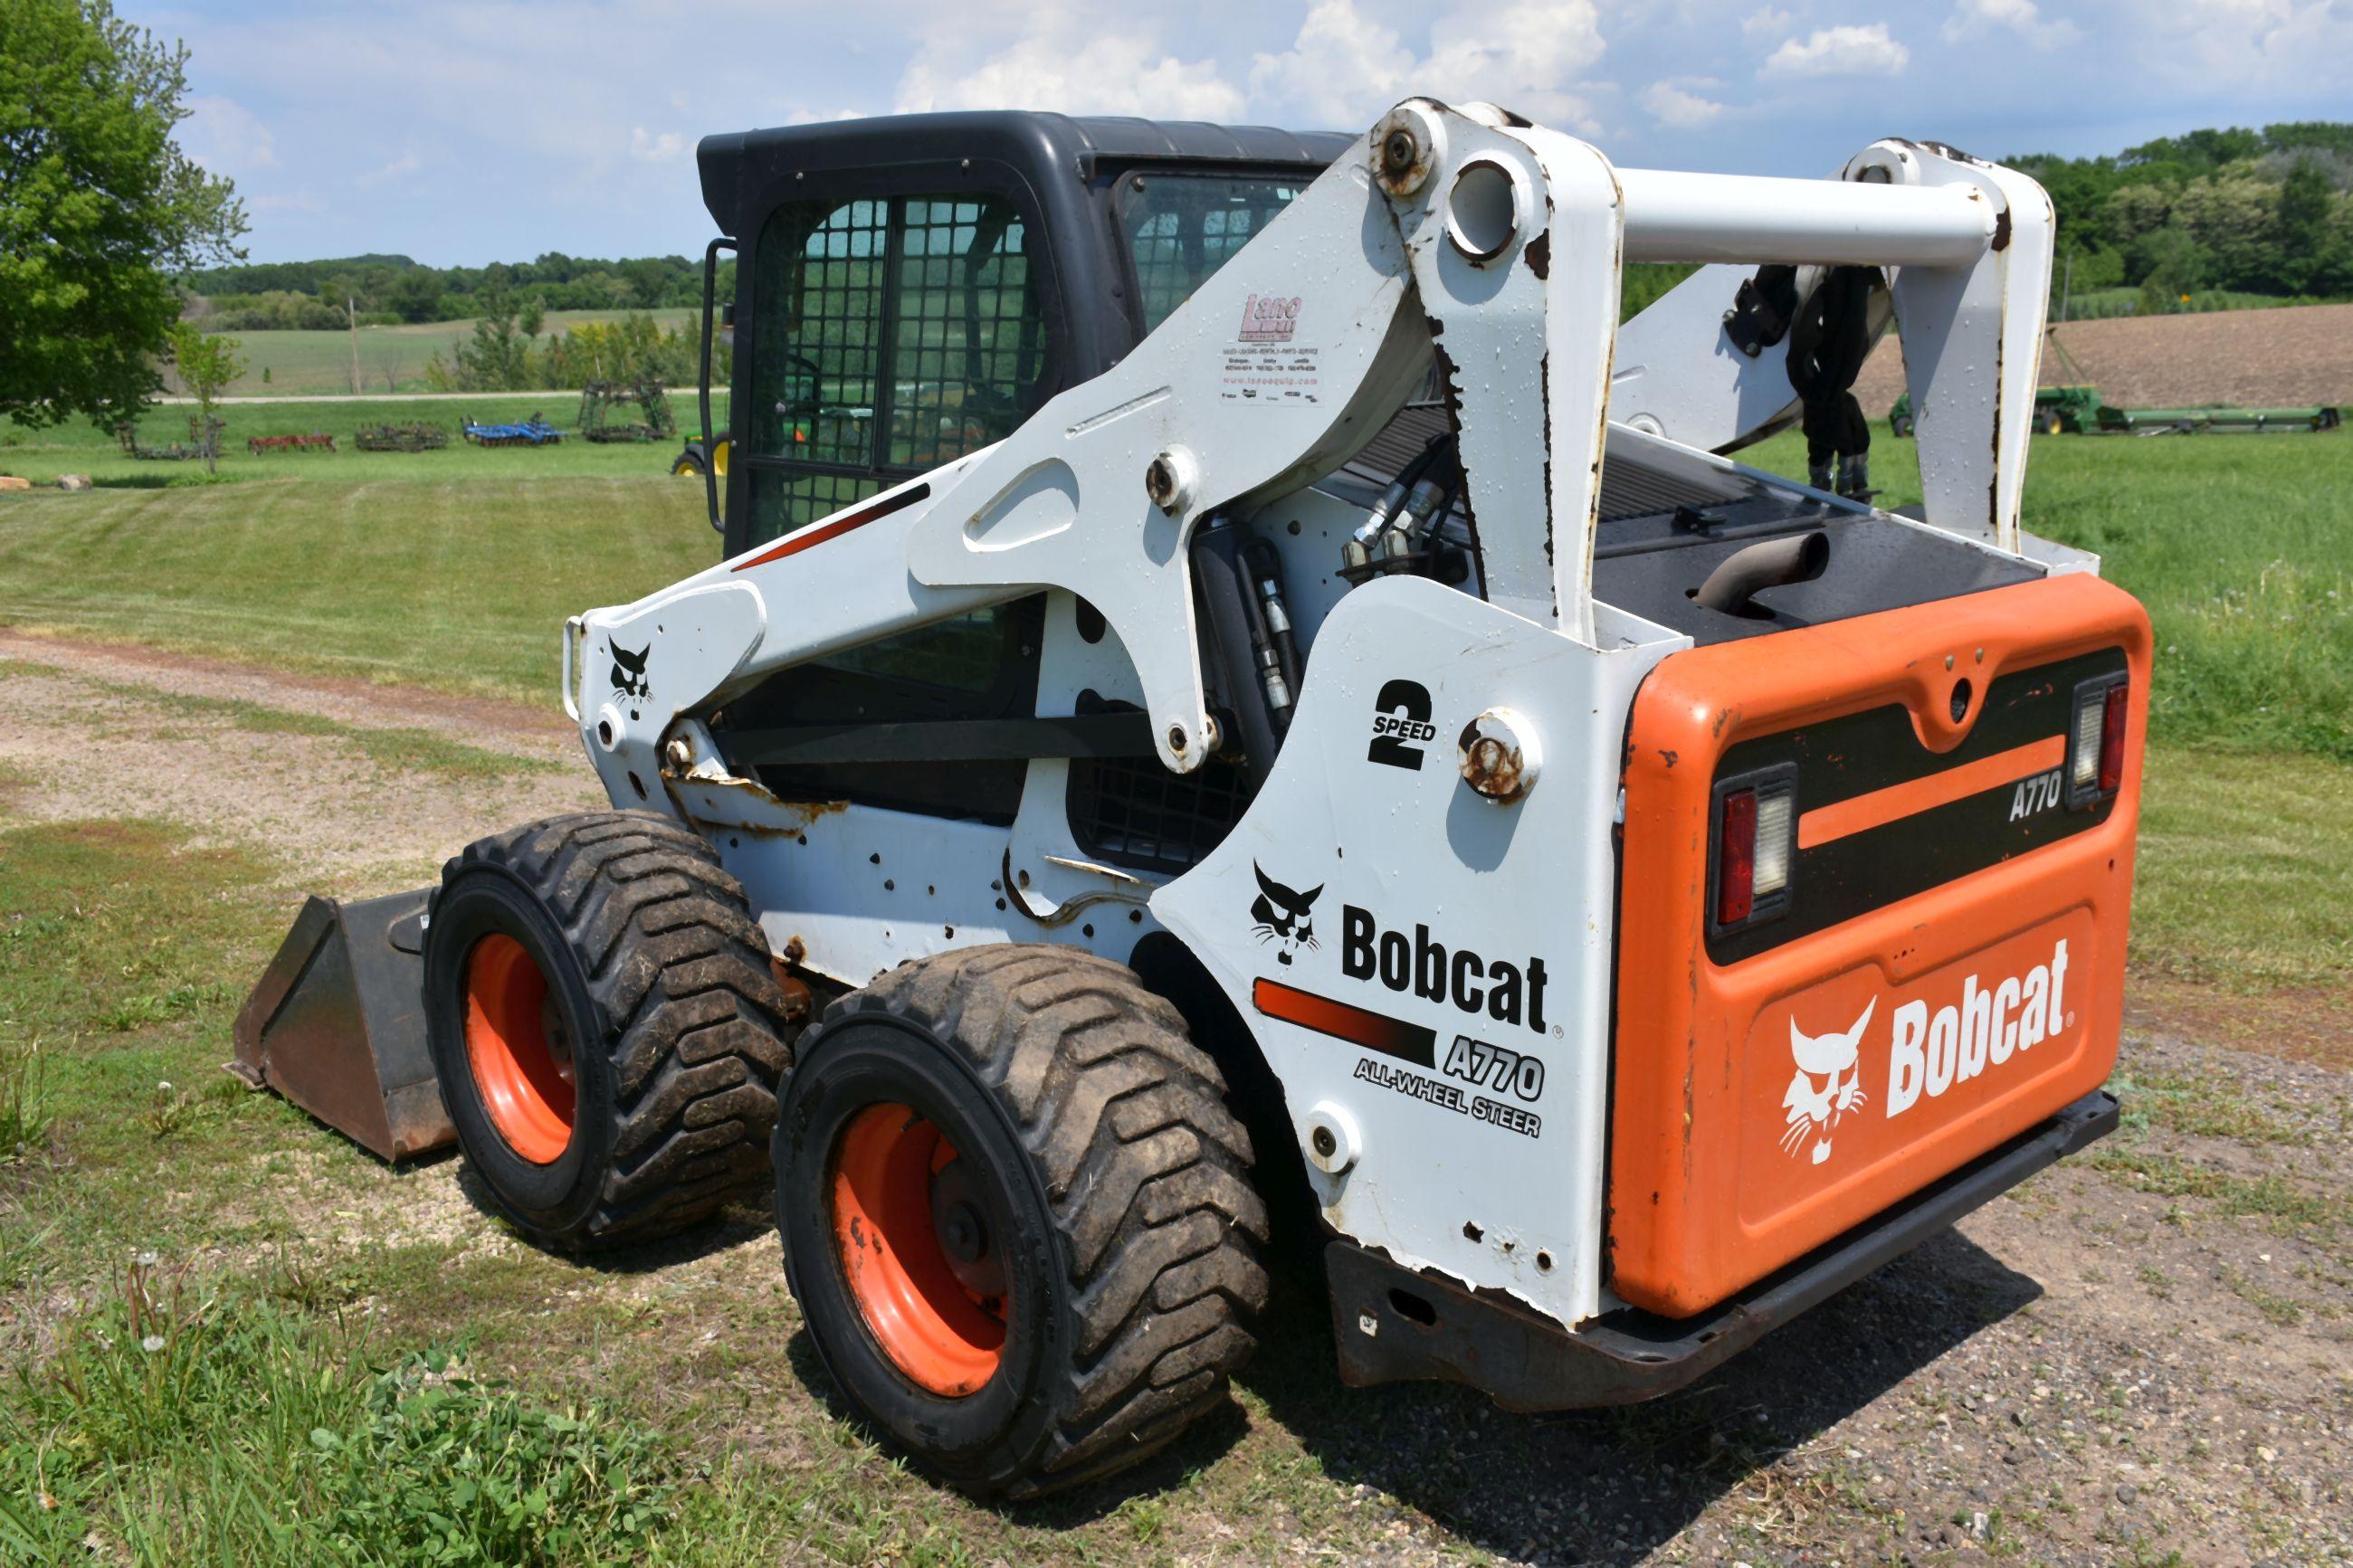 2012 Bobcat A770 All Wheel Steer Skid Loader, 1310 Actual Hours, Hand Controls, Cab, Heat, AC, Power